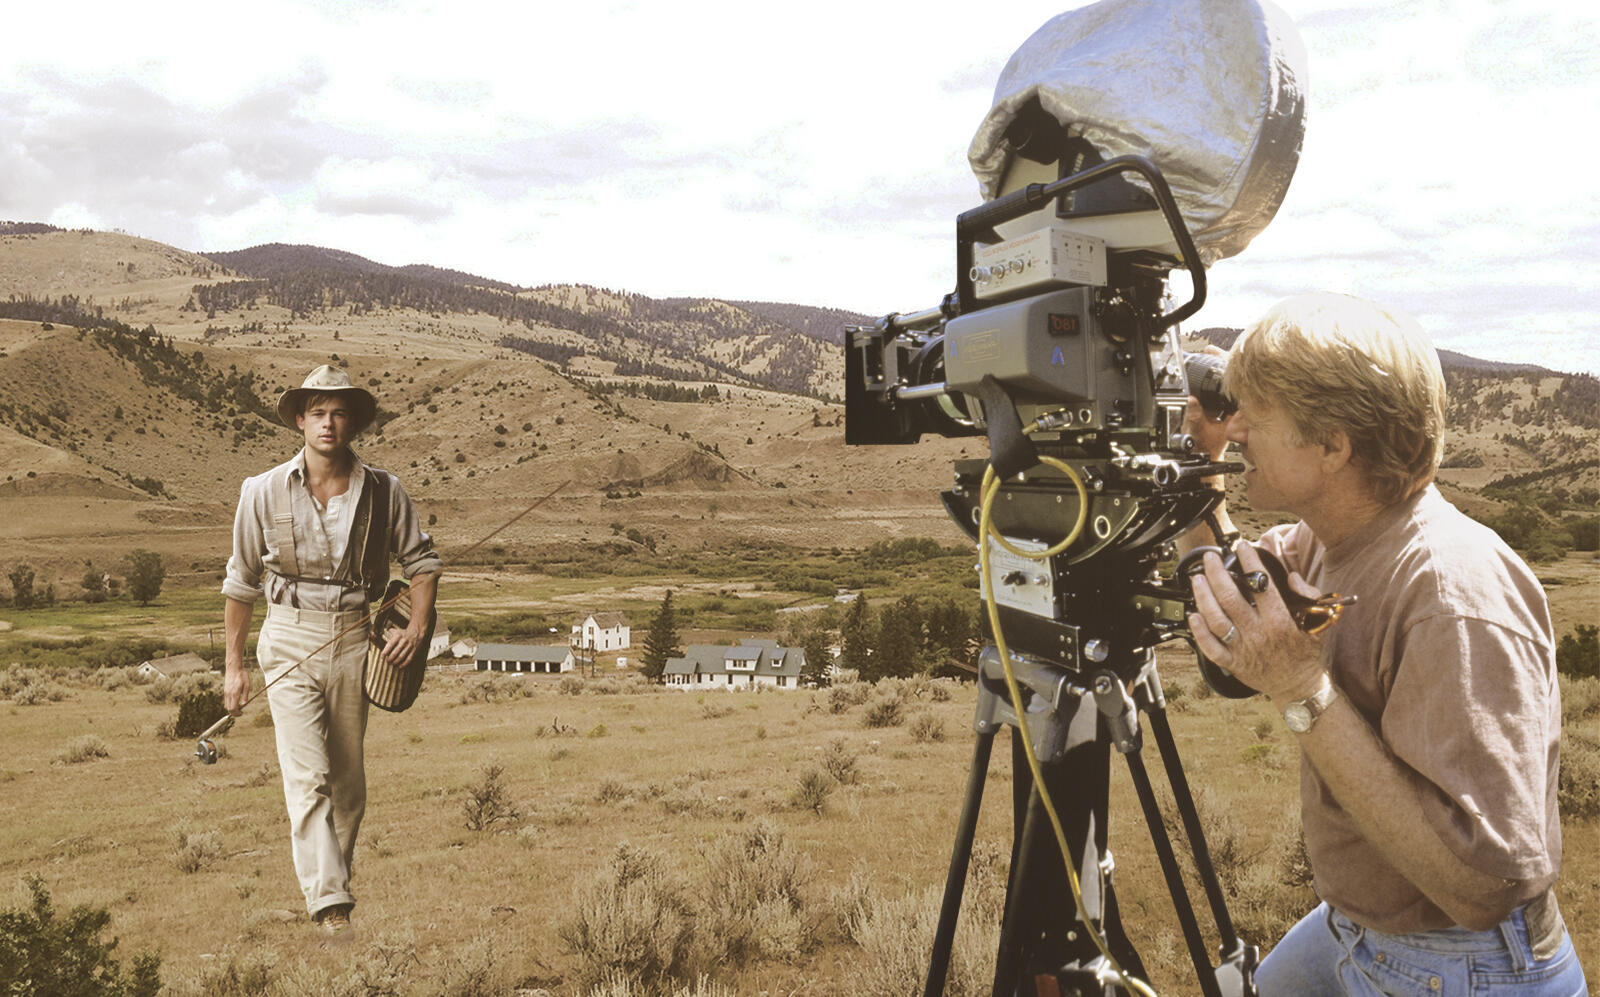 The Montana property with director Robert Redford and star Brad Pitt. (Getty, Swan Land Company)